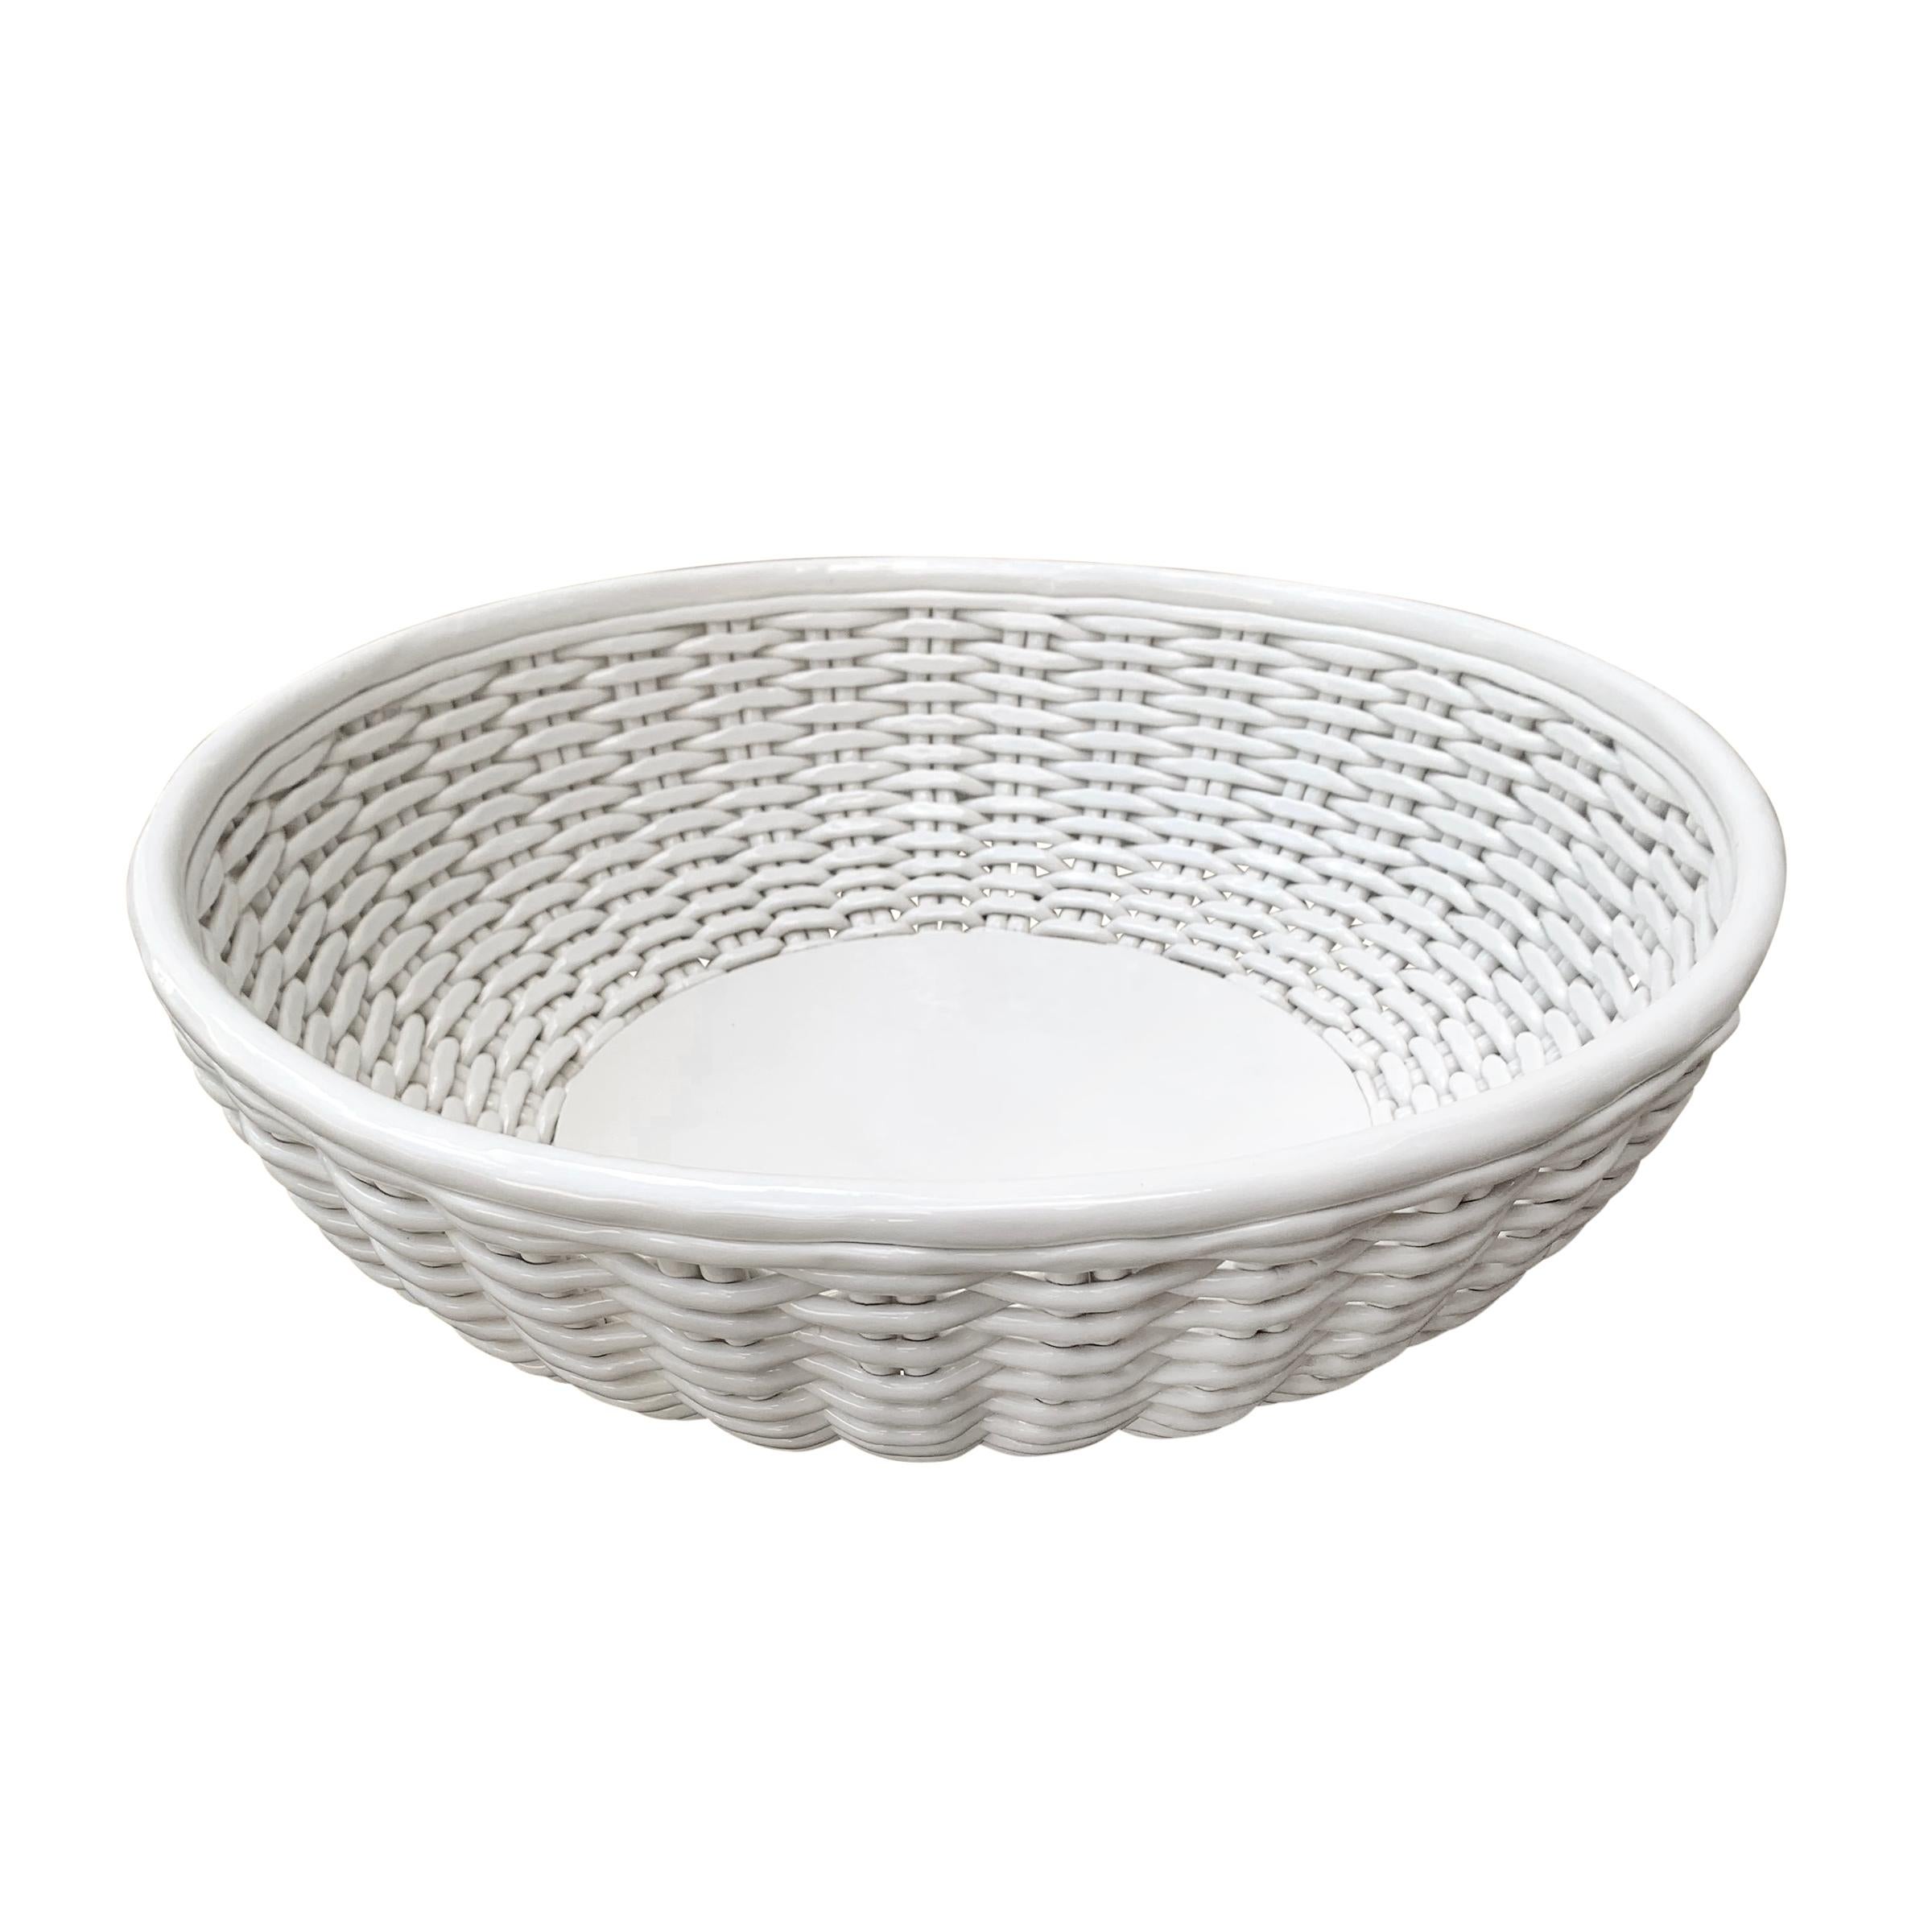 A grande Italian woven porcelain bowl perfect for fruit on your kitchen counter, magazines on your ottoman, mail by your front door, or any other myriad uses around your home.